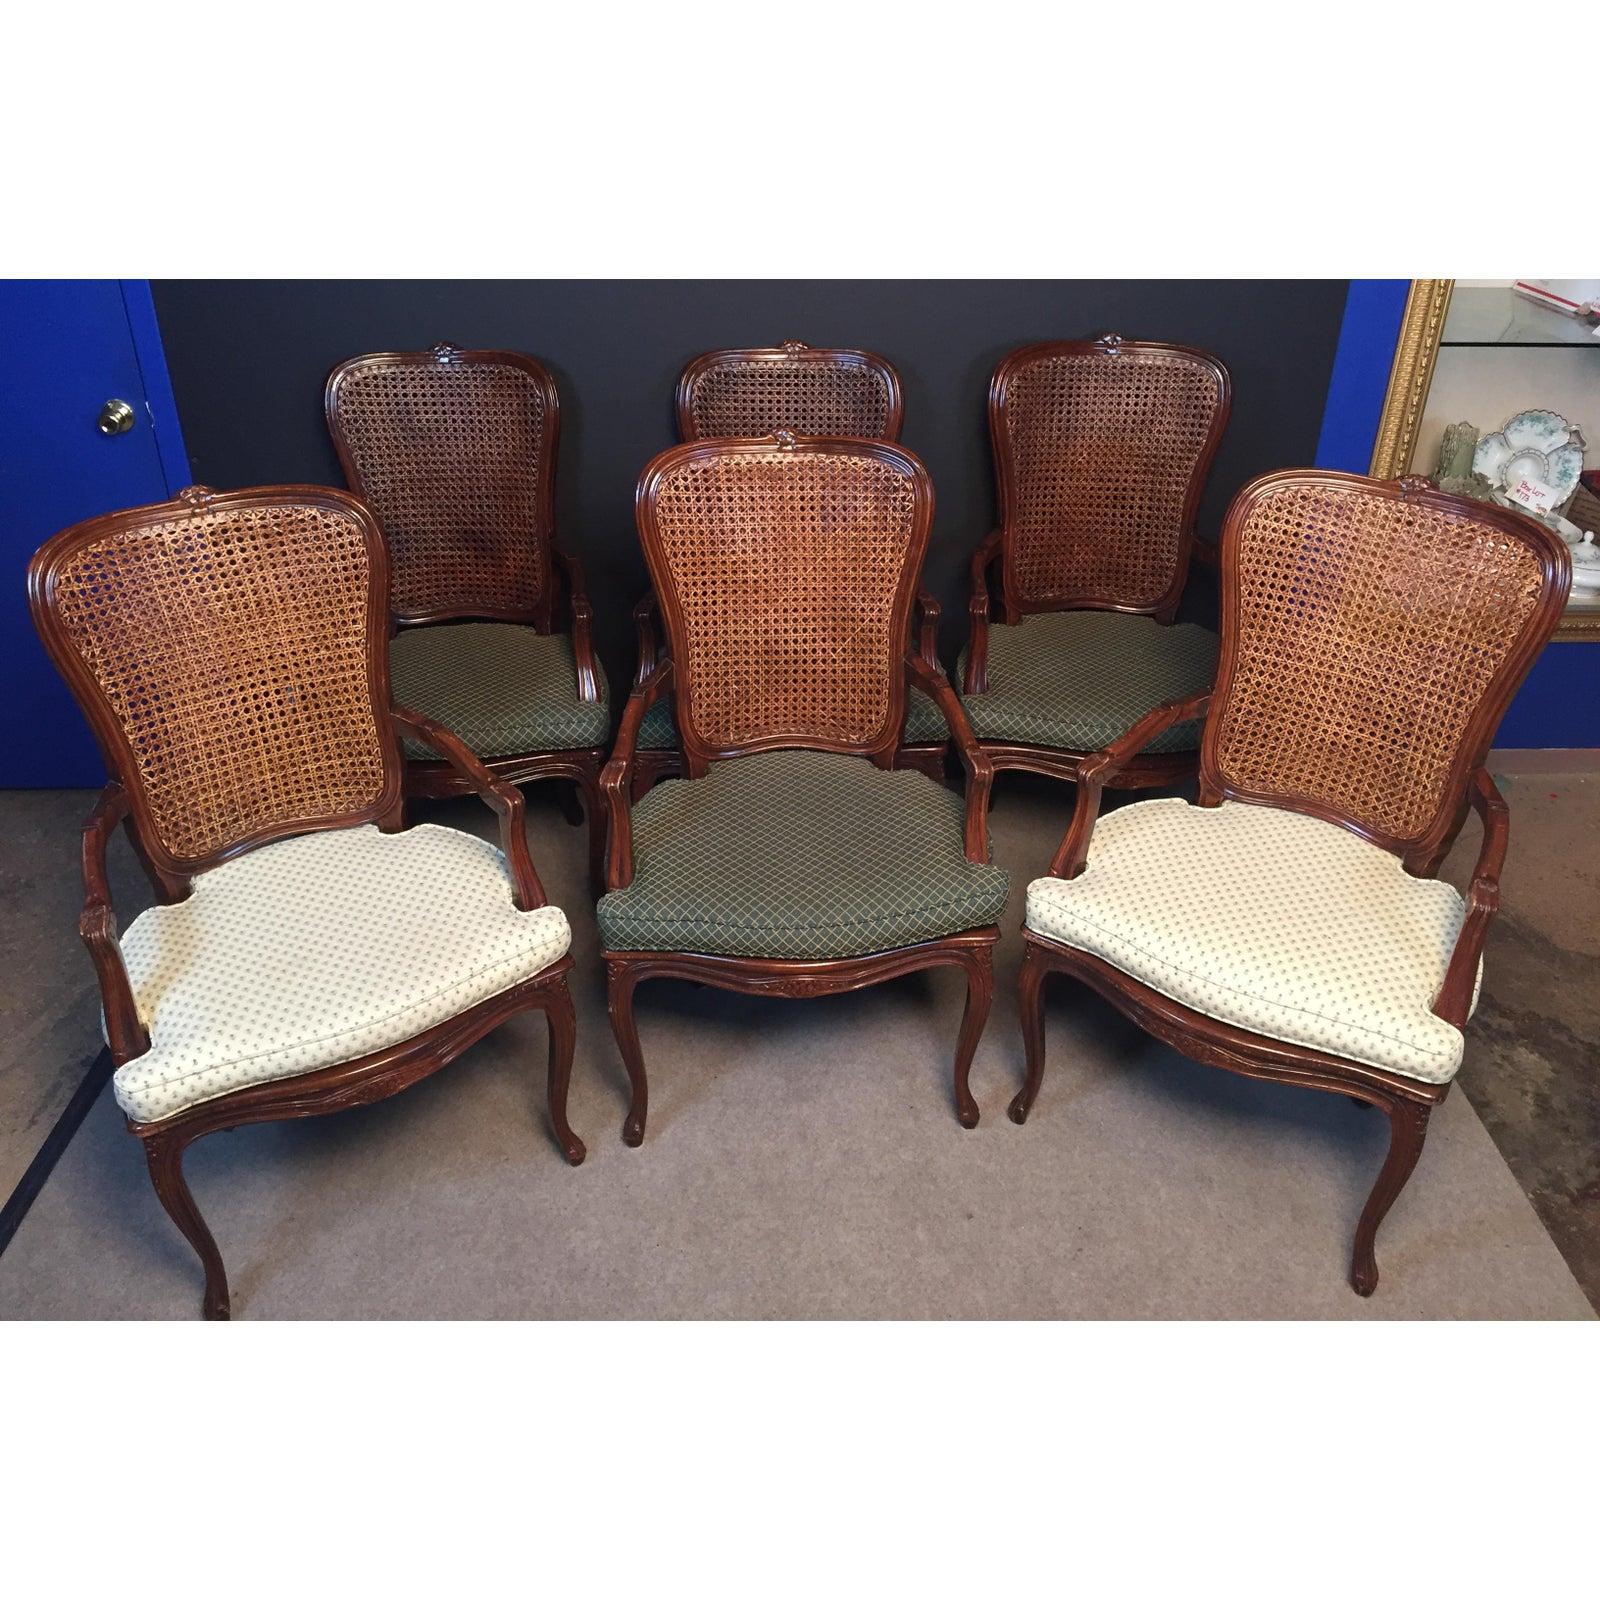 Set of 6 Carved Wood and Caned Dining Arm Chairs. Six dining chairs with double caned backs and upholstered seats. Two with white print seats and 4 with green print seats. Hand caning on front and rear of back as well as seat. Carved floral design